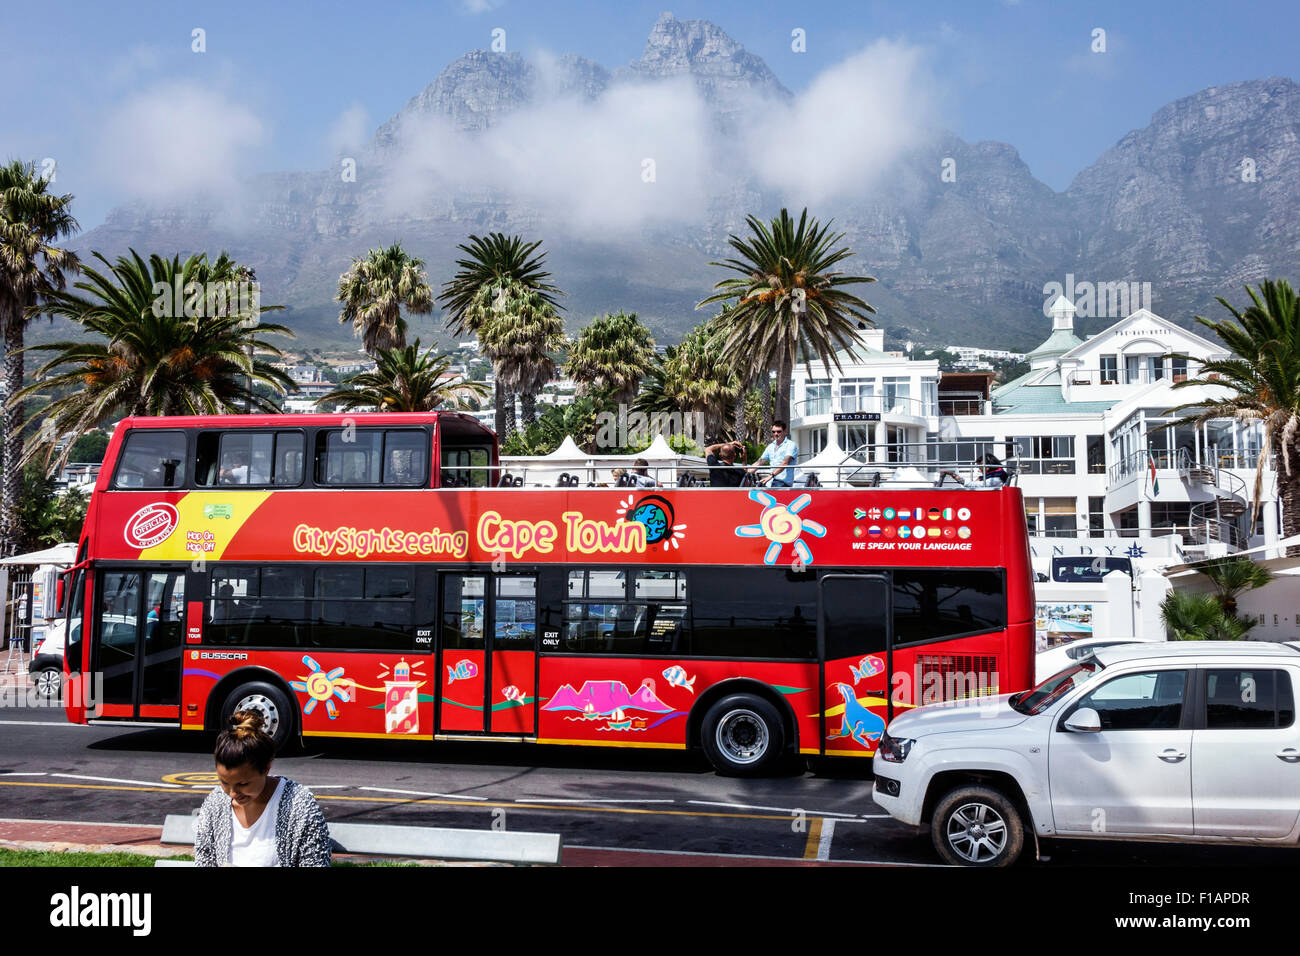 Cape Town South Africa,Camps Bay,Victoria Road,Table Mountain National Park,City,red,double decker bus,coach,fog,SAfri150312041 Stock Photo